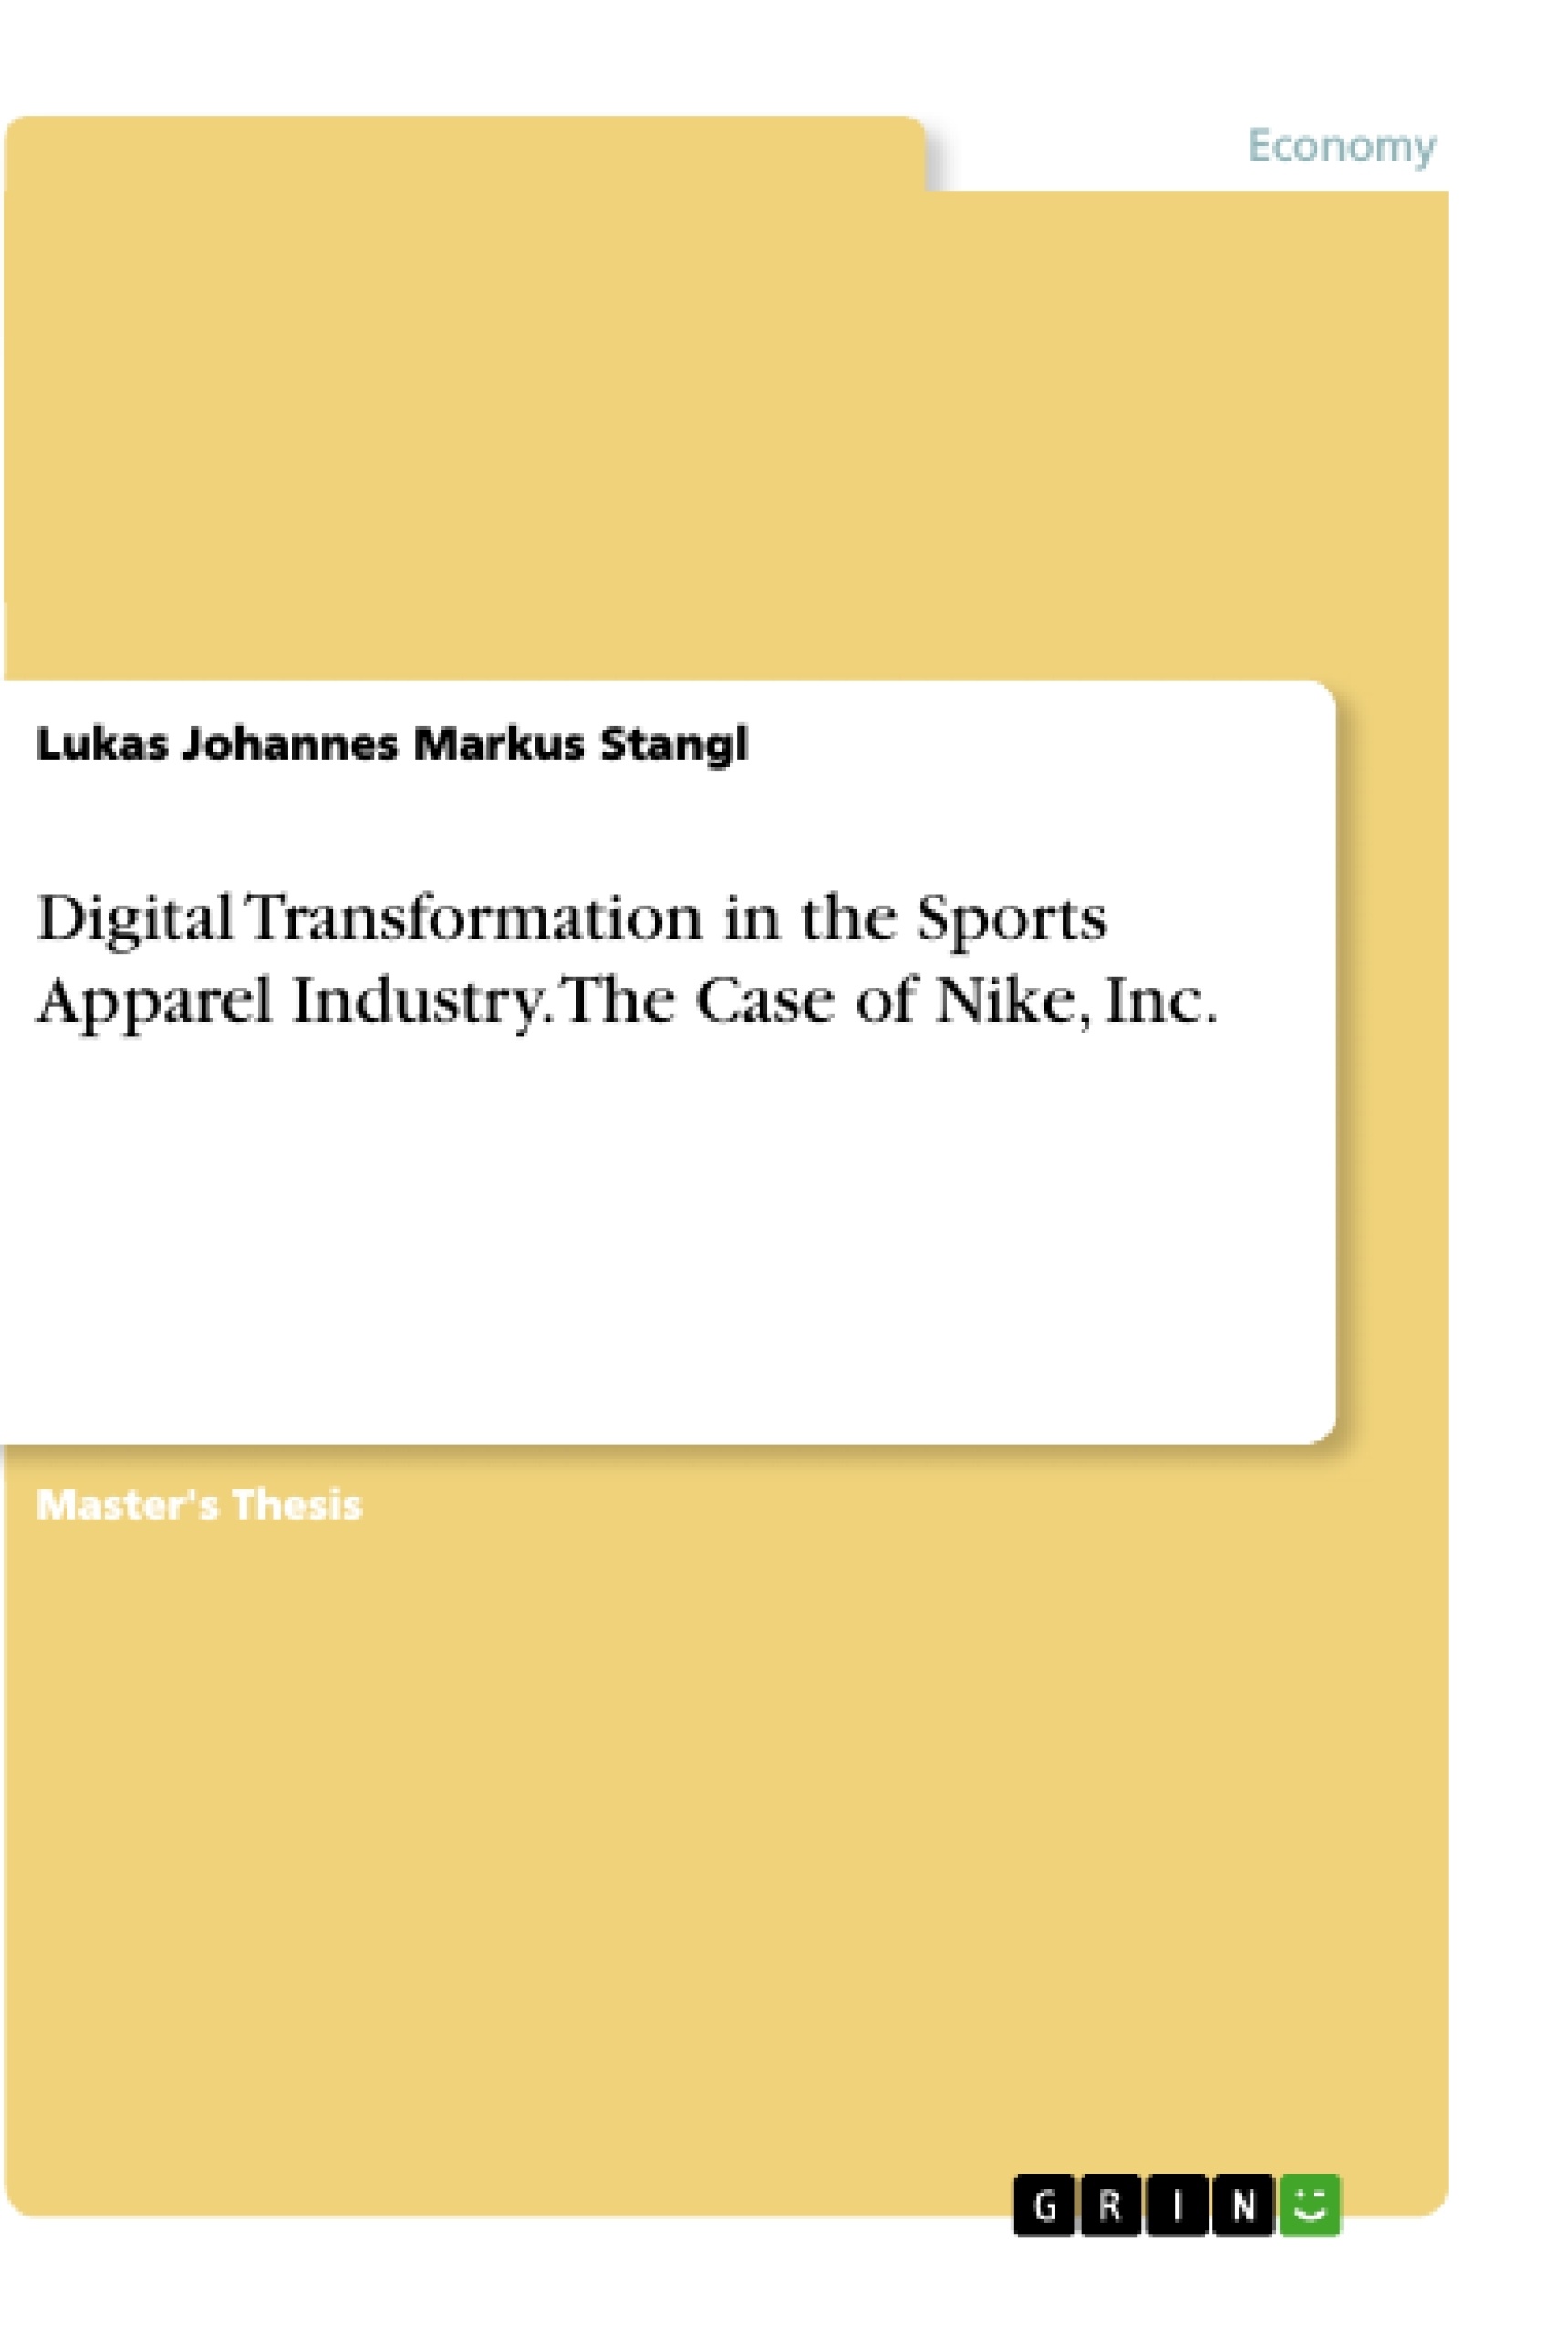 Title: Digital Transformation in the Sports Apparel Industry. The Case of Nike, Inc.